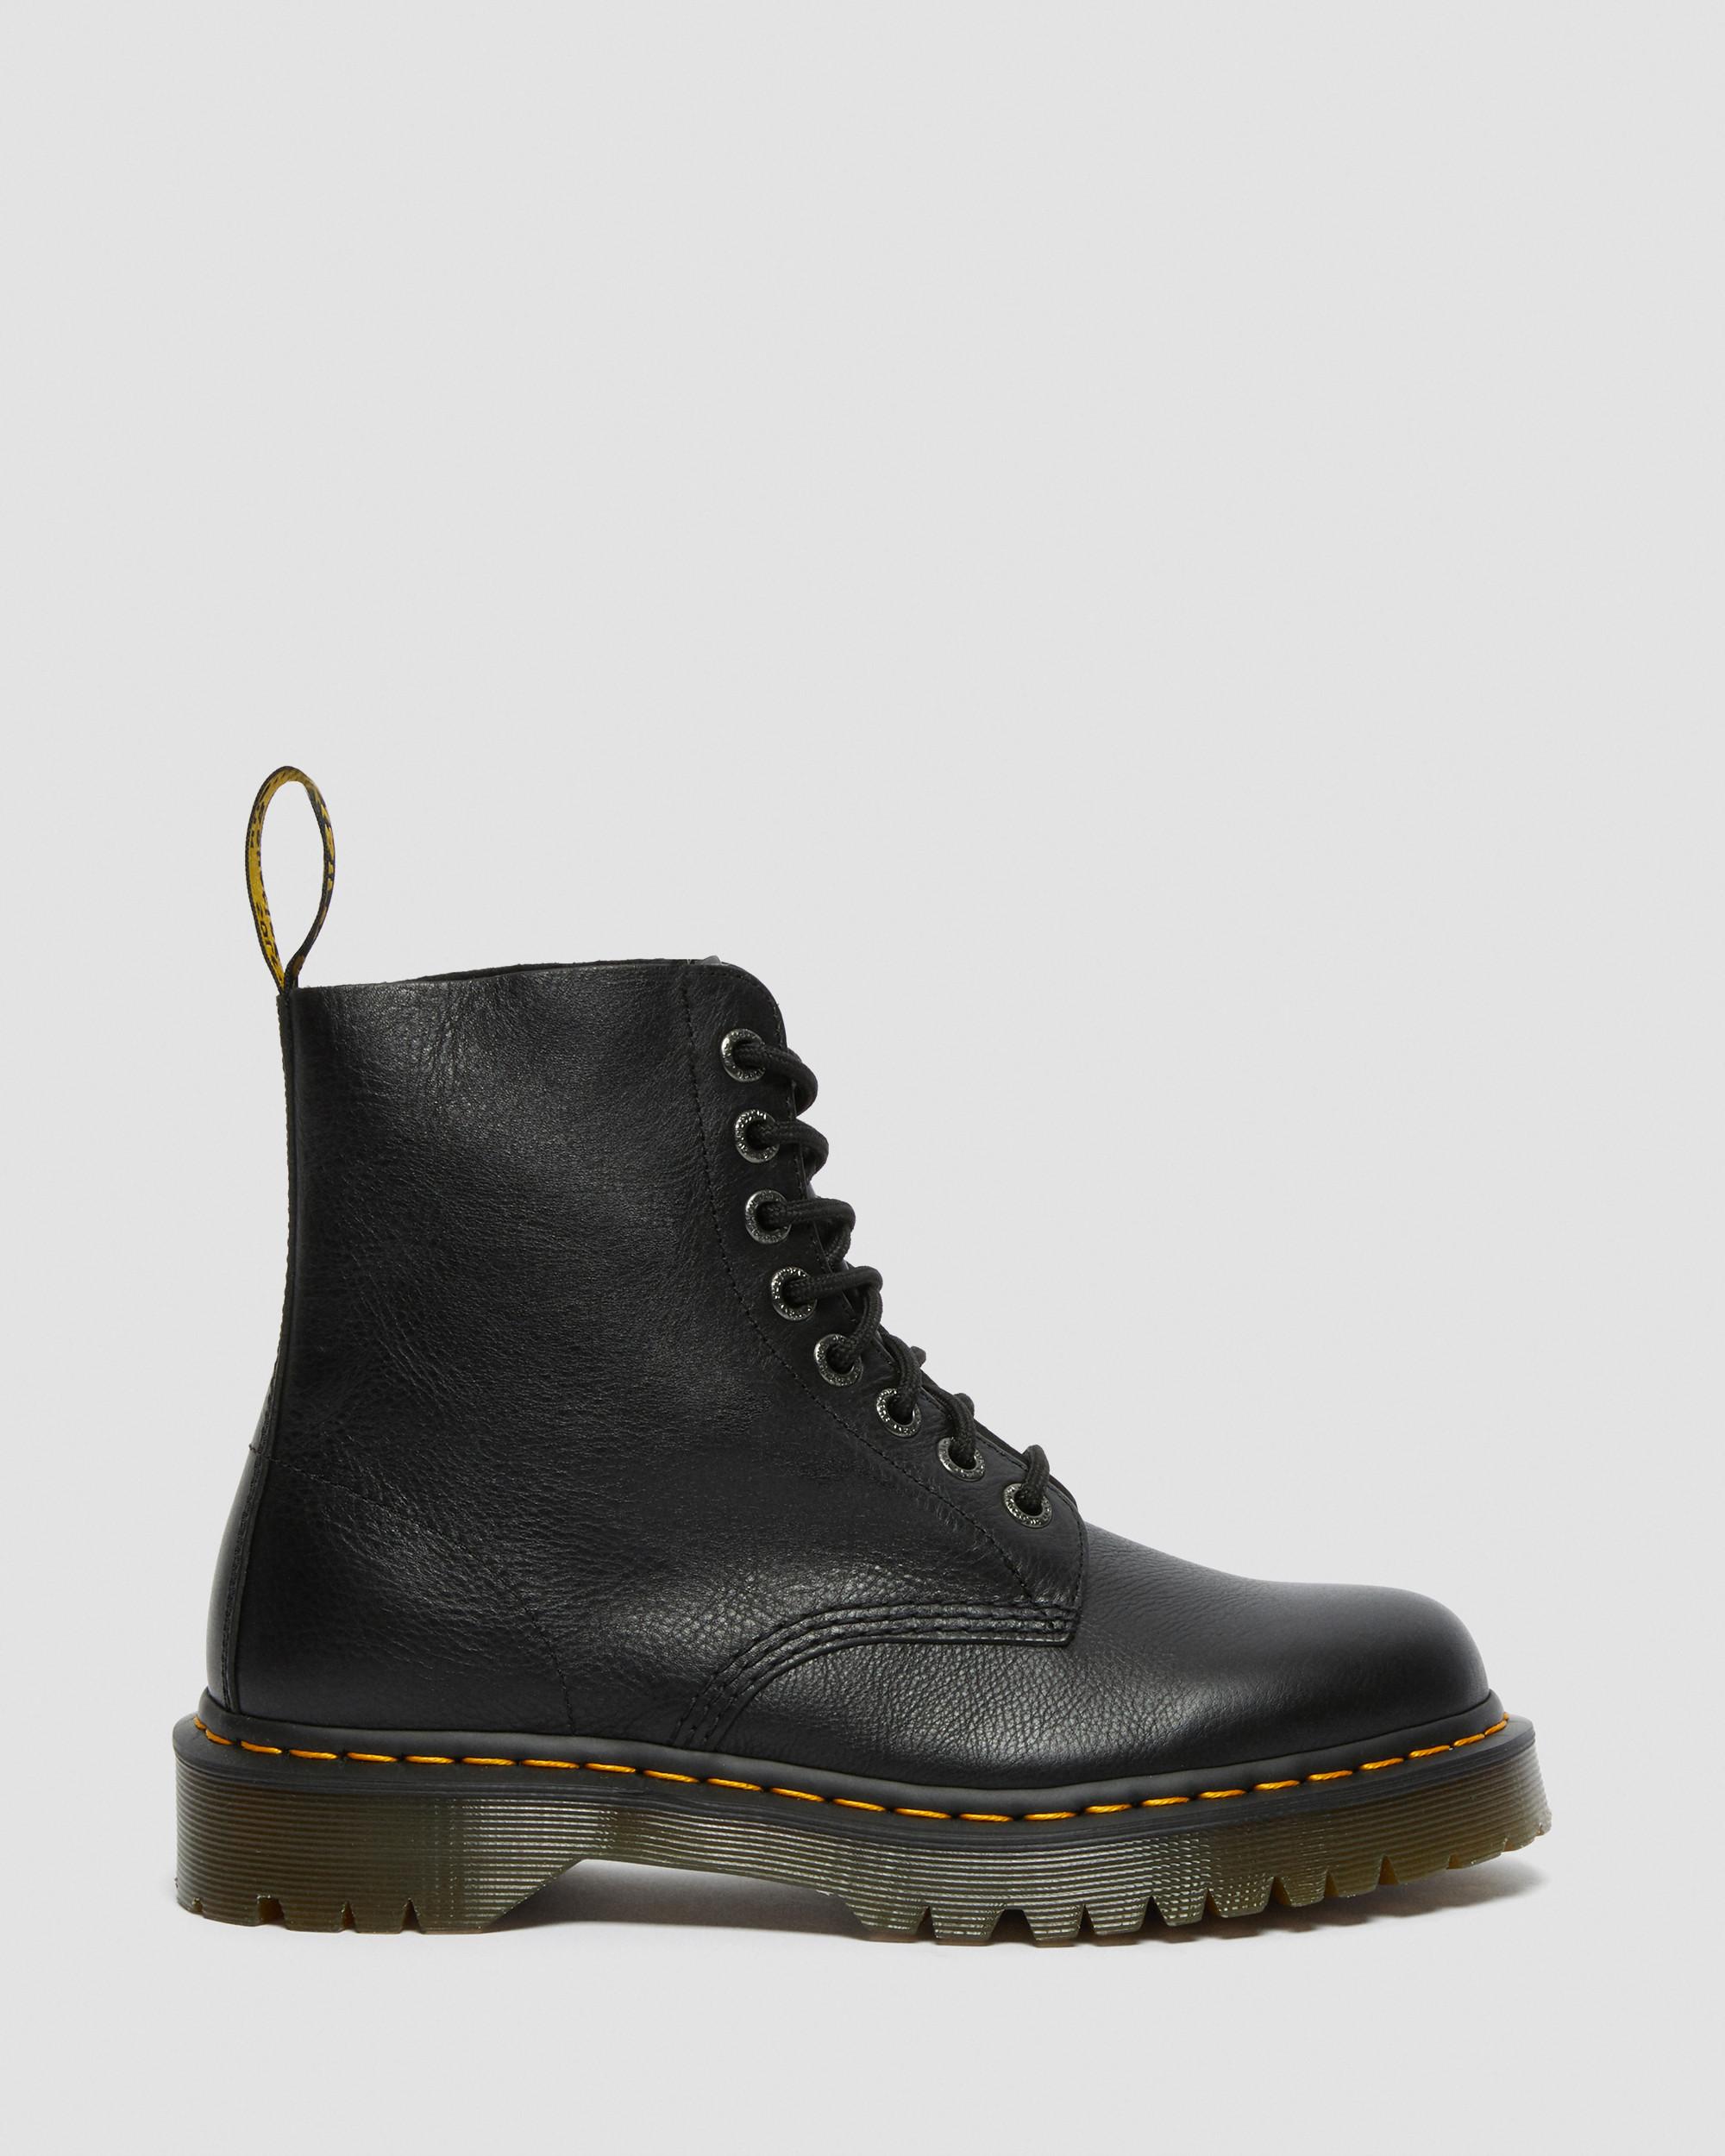 DR MARTENS 1460 Pascal Bex Pisa Leather Lace Up Boots